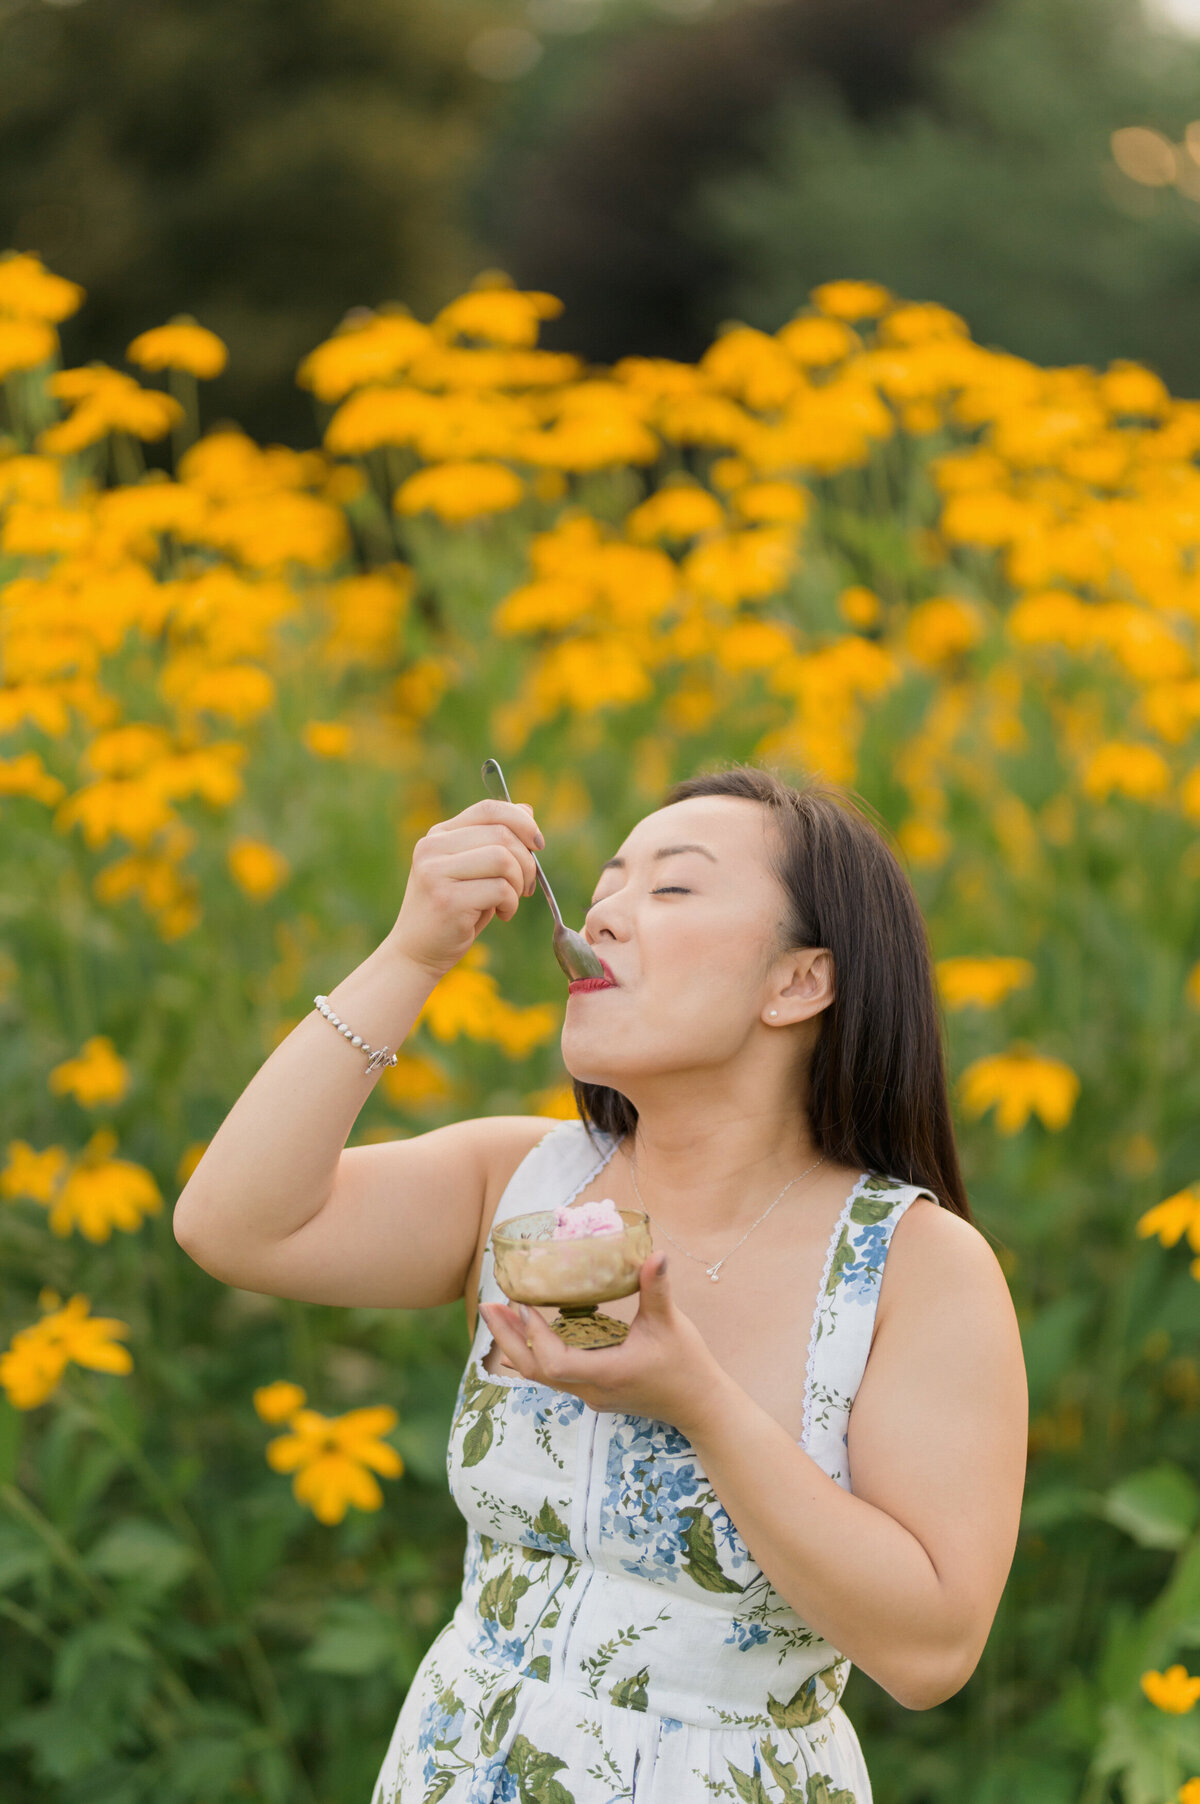 multicultural couple engagement session and a picnic at the park in new england. indain man and asian women eat ice cream and playful portraits.